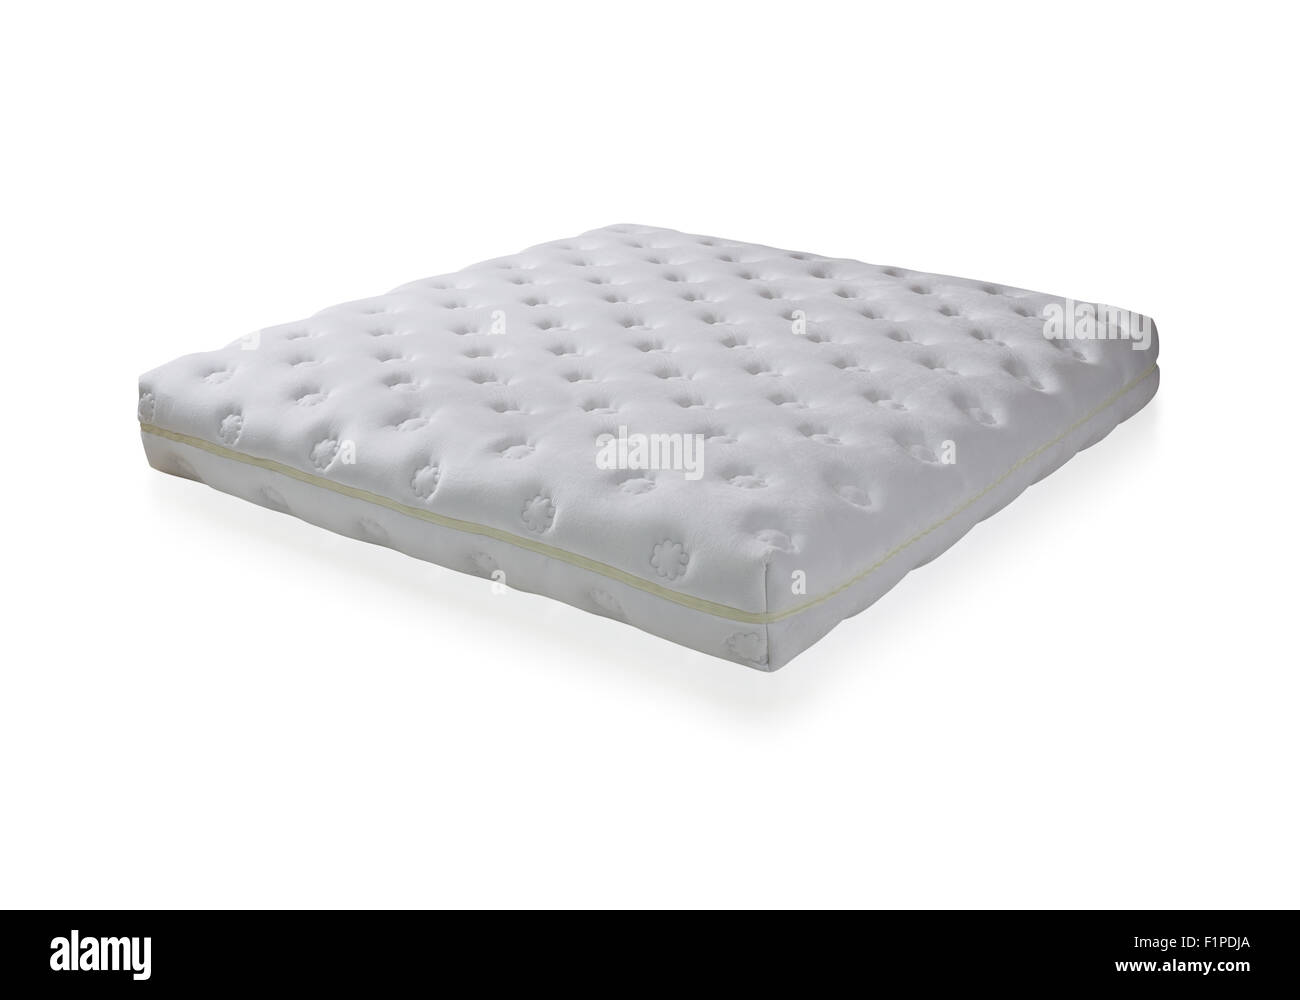 https://c8.alamy.com/comp/F1PDJA/mattress-to-supported-back-the-image-isolated-on-white-background-F1PDJA.jpg